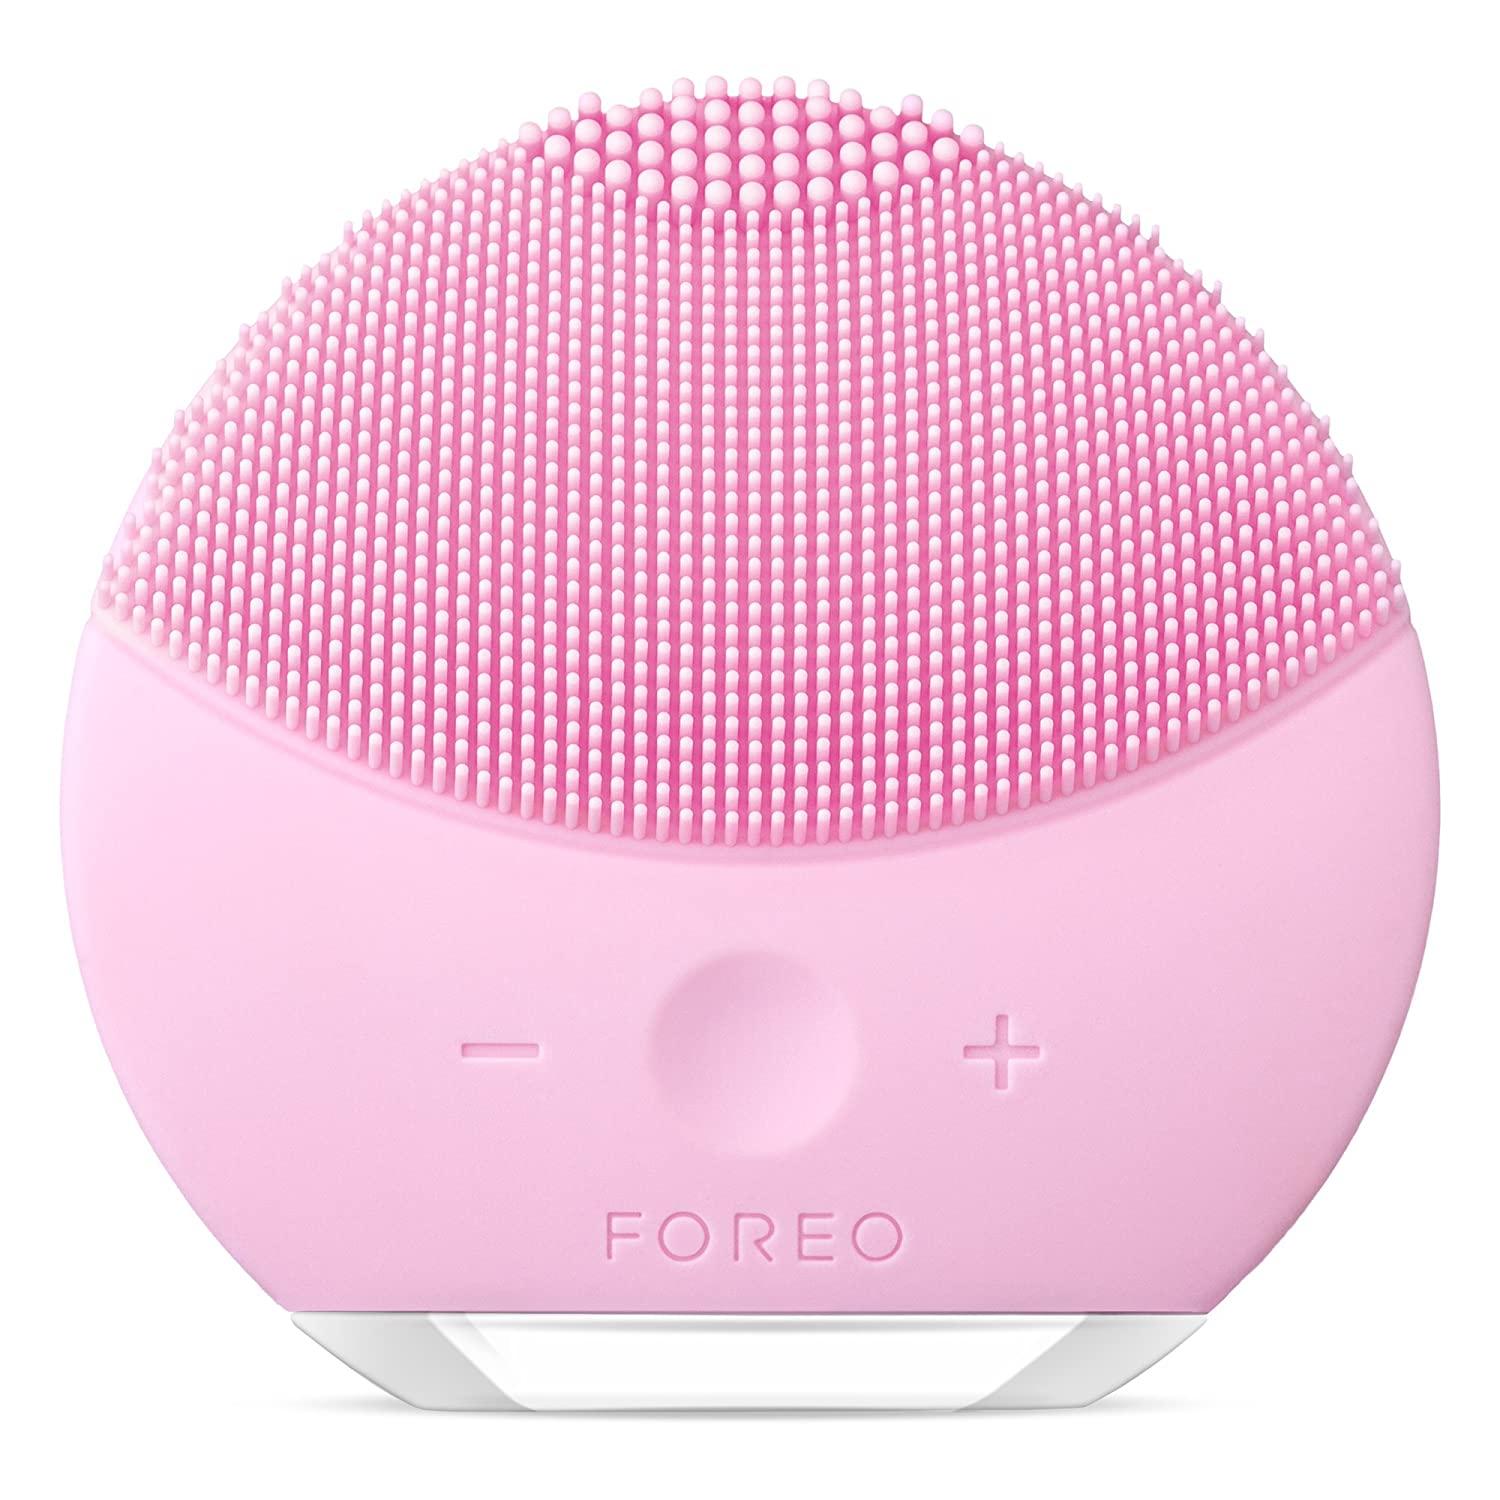 Foreo Luna mini 2 Facial Cleansing Brush for $89.25 Shipped